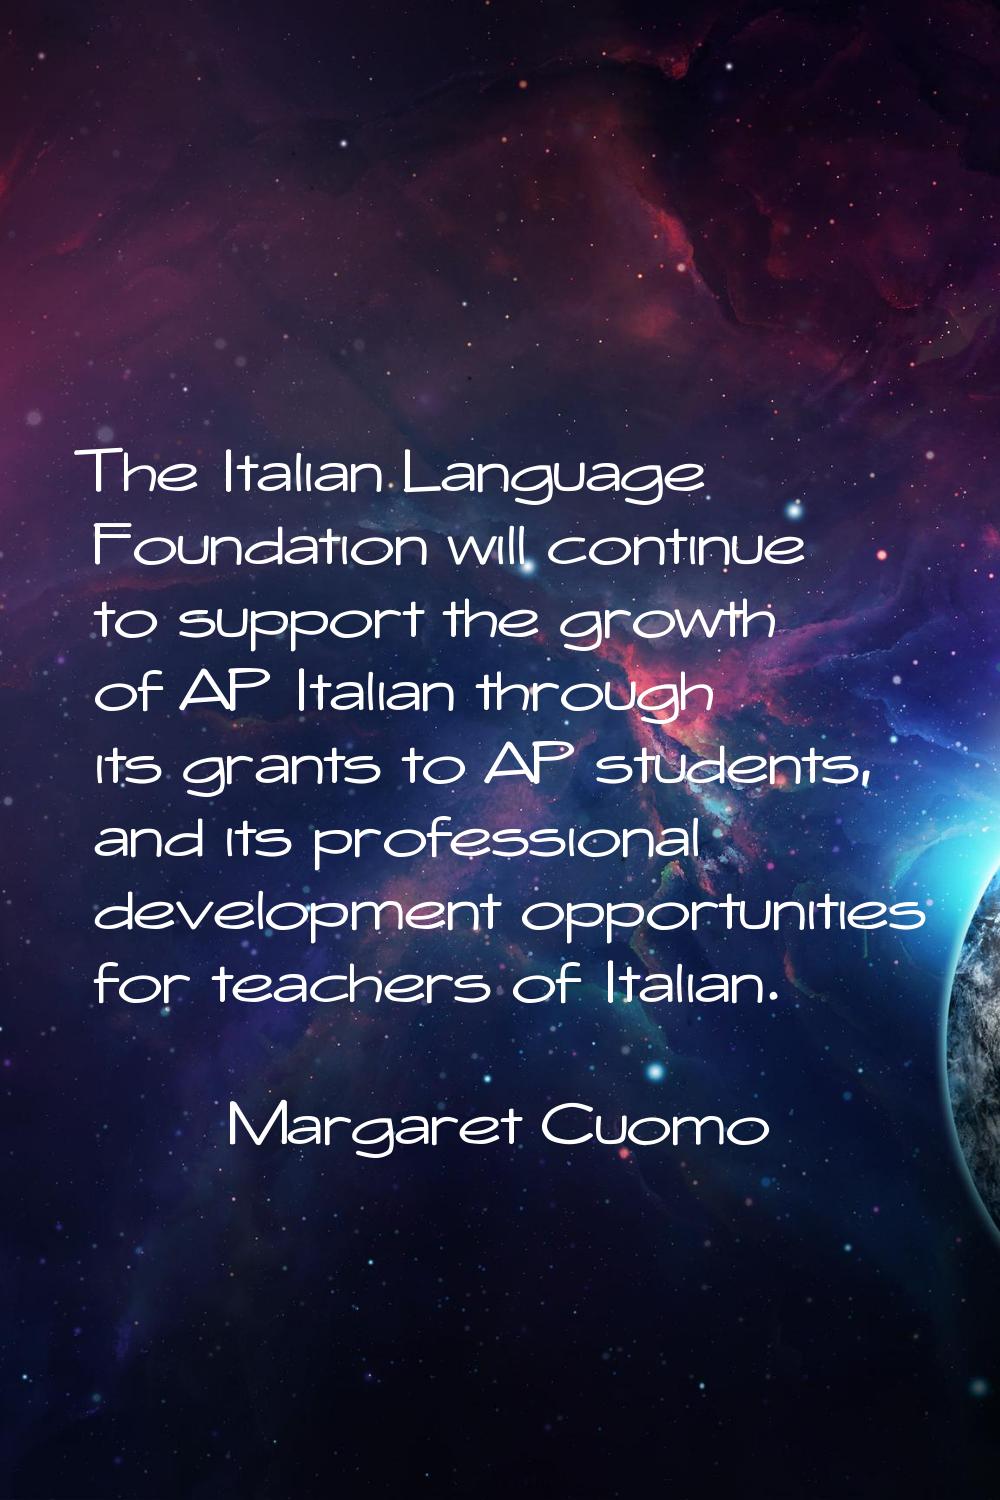 The Italian Language Foundation will continue to support the growth of AP Italian through its grant